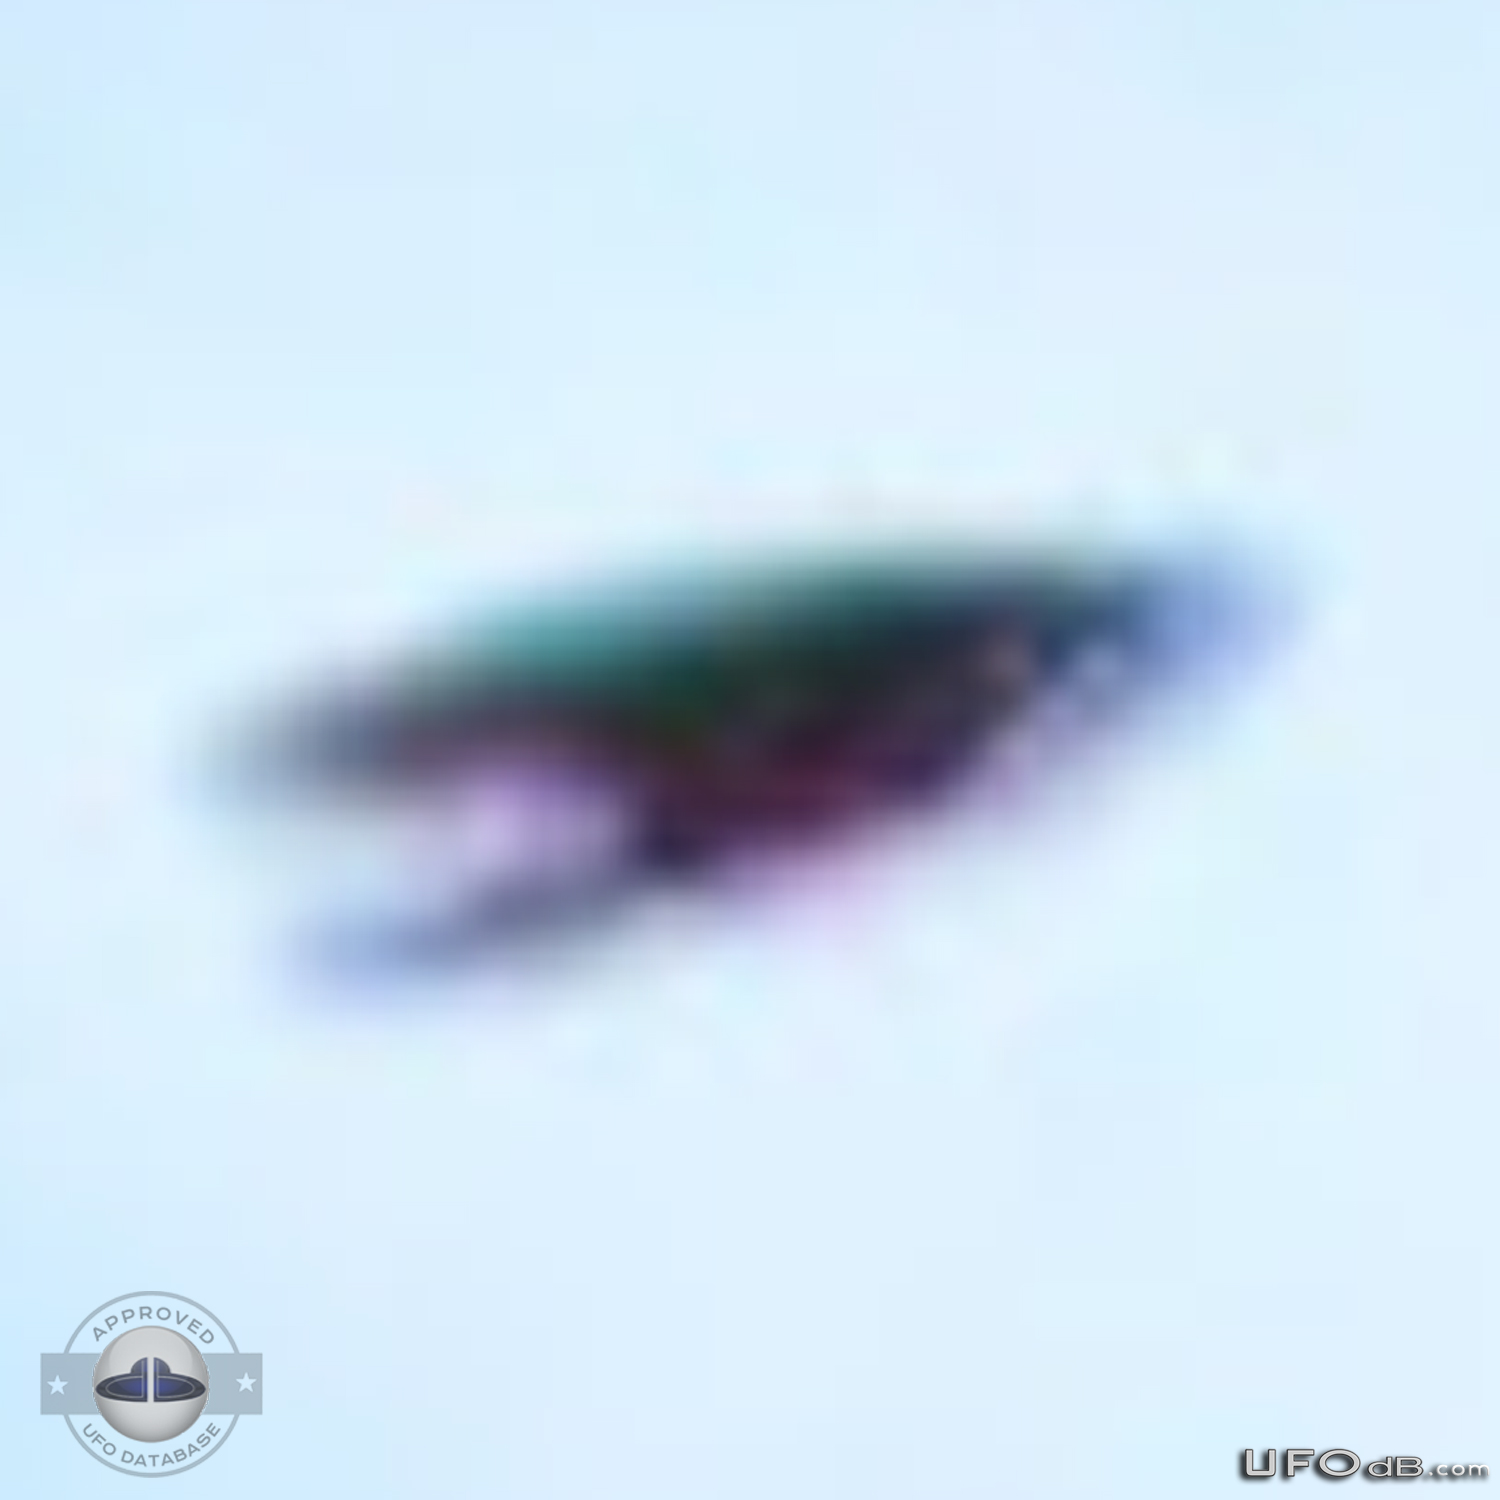 Black Boomerang UFO in the Mountains in Cali, Colombia | January 2011 UFO Picture #245-5